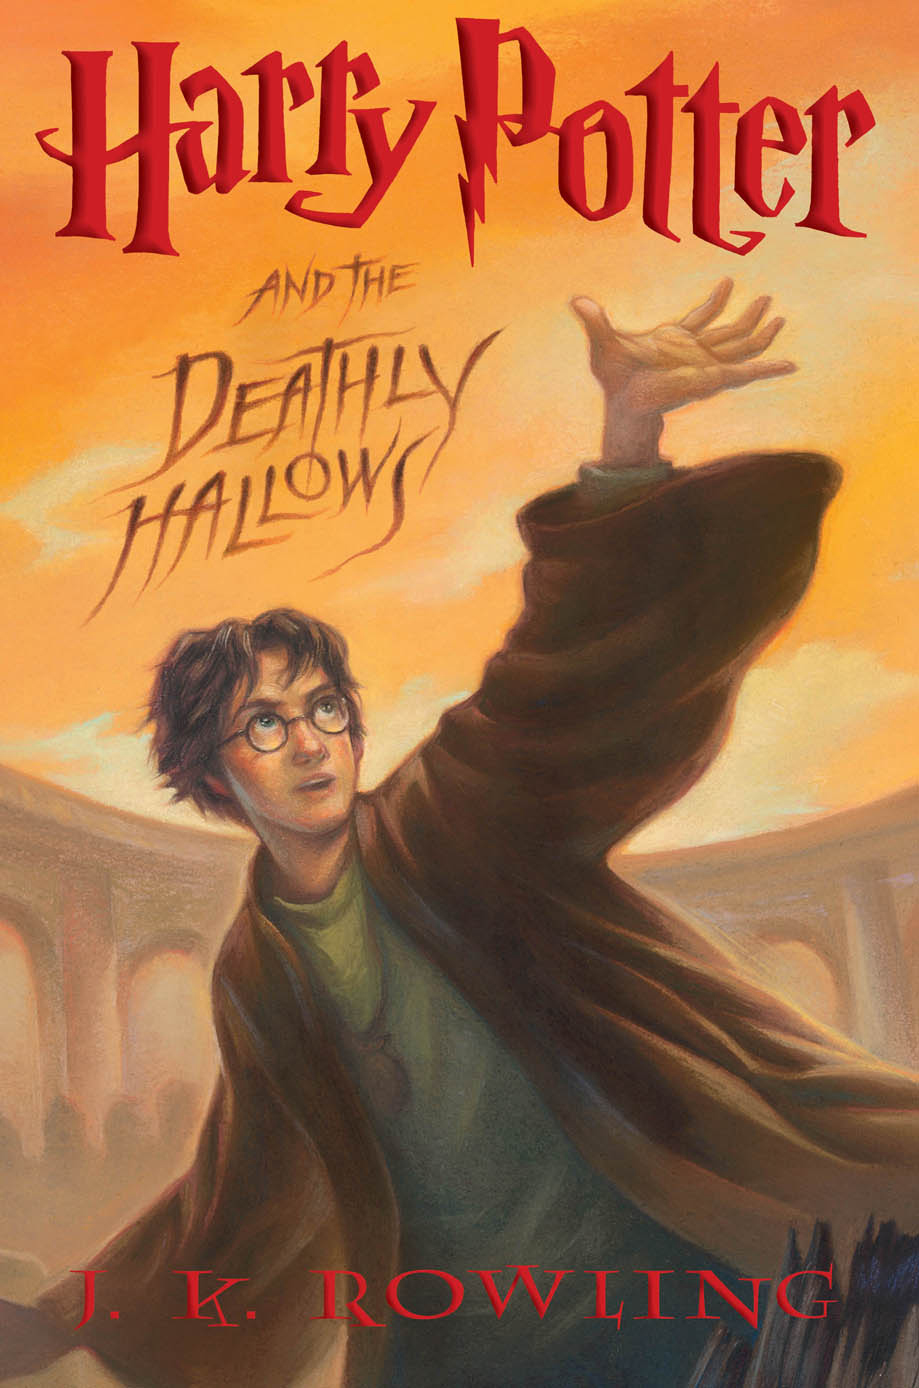 Harry Potter And The Deathly Hallows Book Vs Movie Part 1 And 2